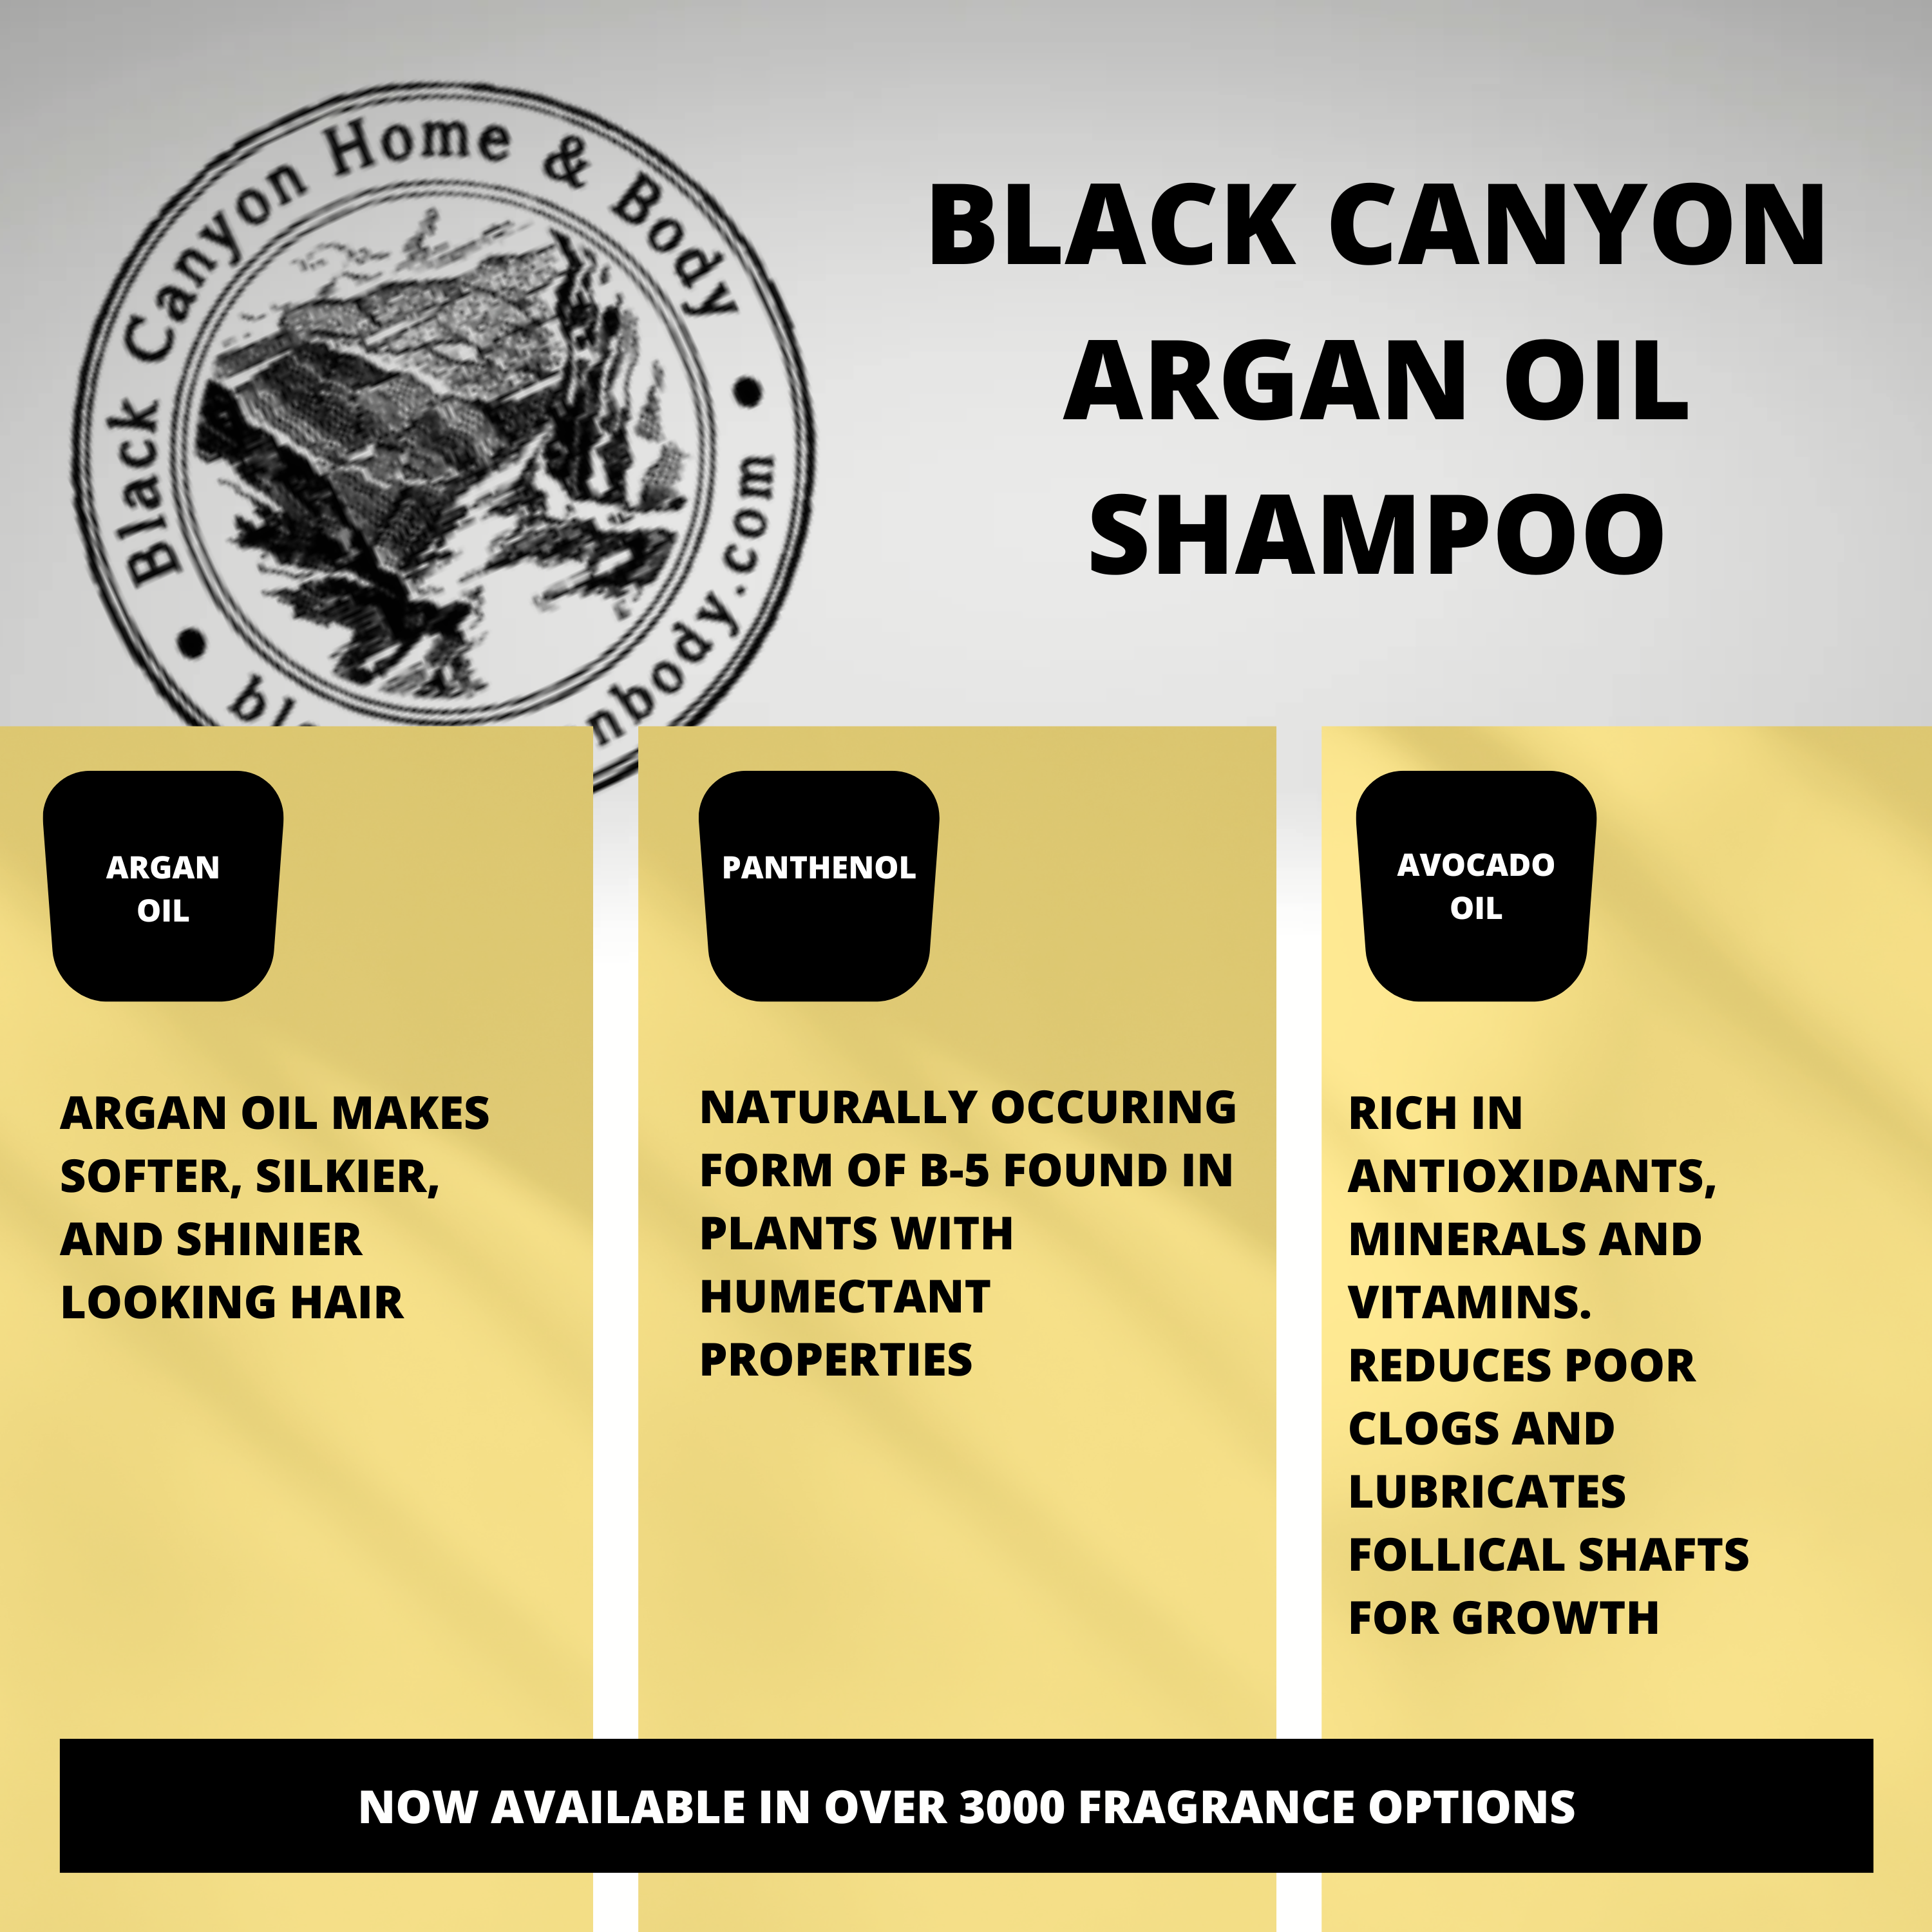 Black Canyon Bug Juice Scented Shampoo with Argan Oil